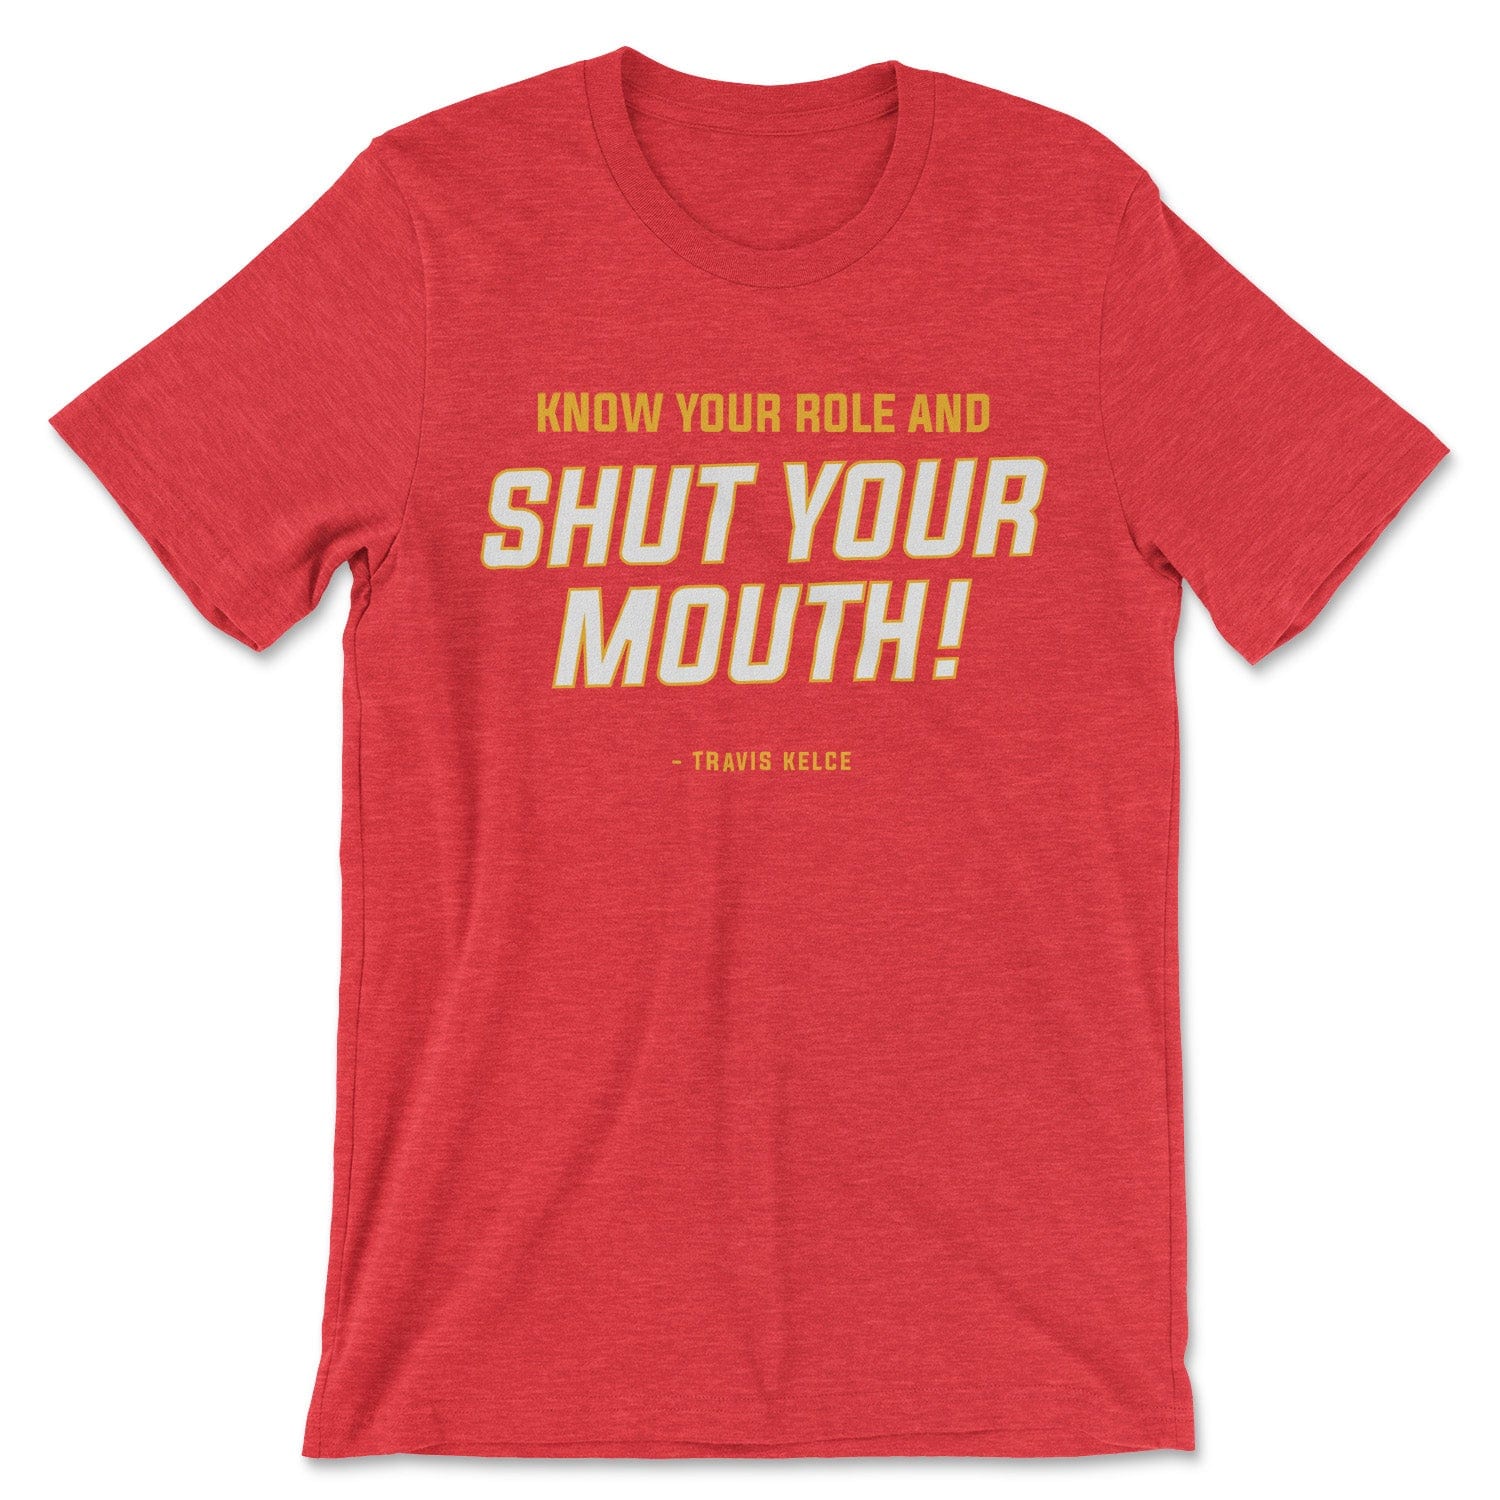 KC Swah Kansas City Chiefs red, yellow, white SHUT YOUR MOUTH on heather red unisex t-shirt 